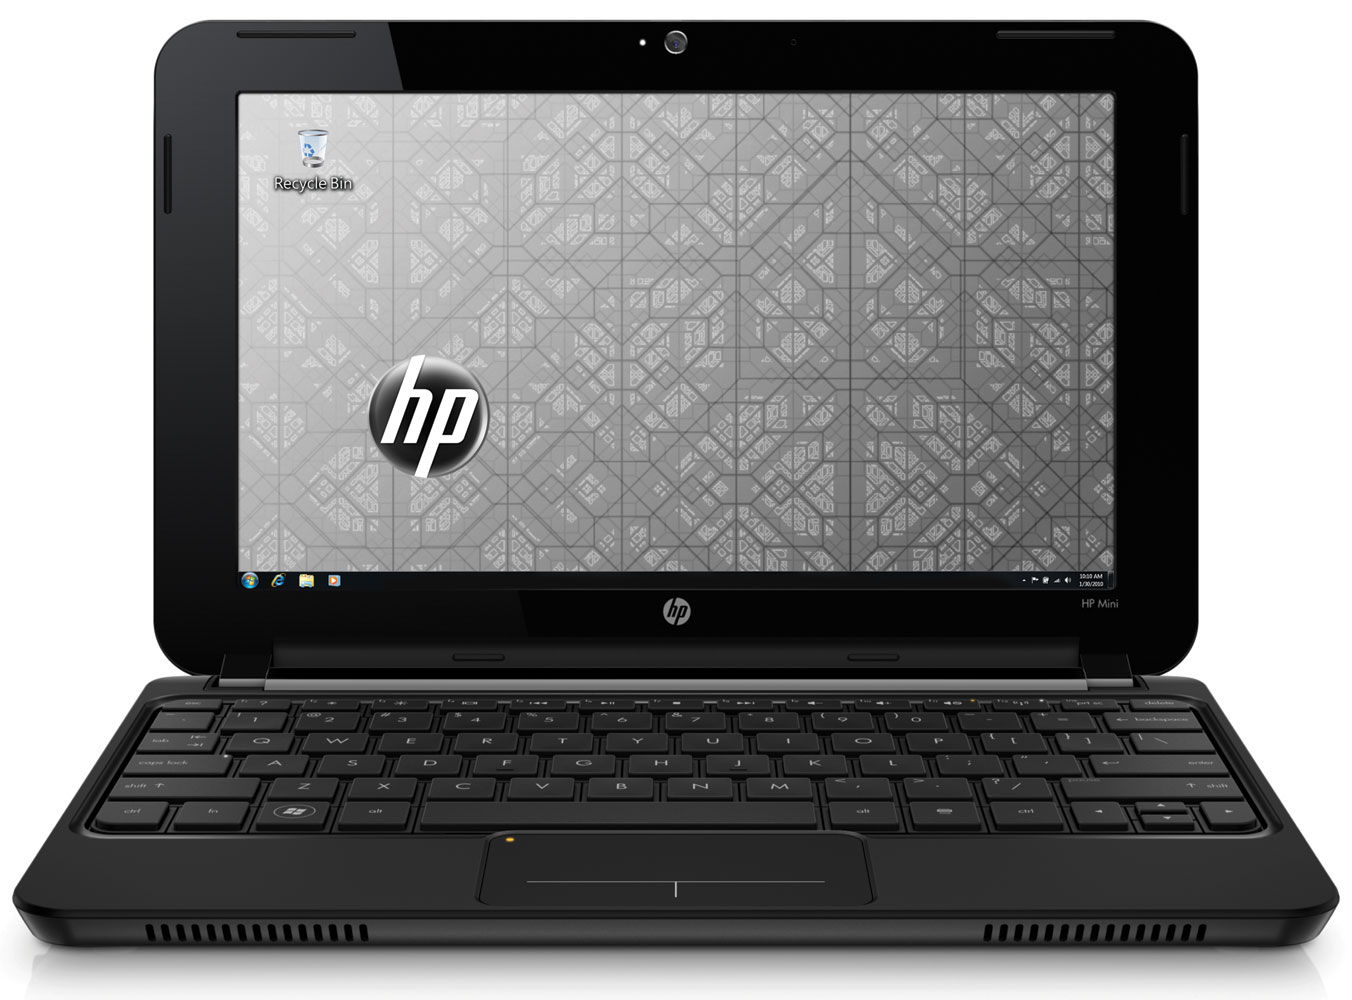 HP 110 - one of the first laptop / notebook computers 